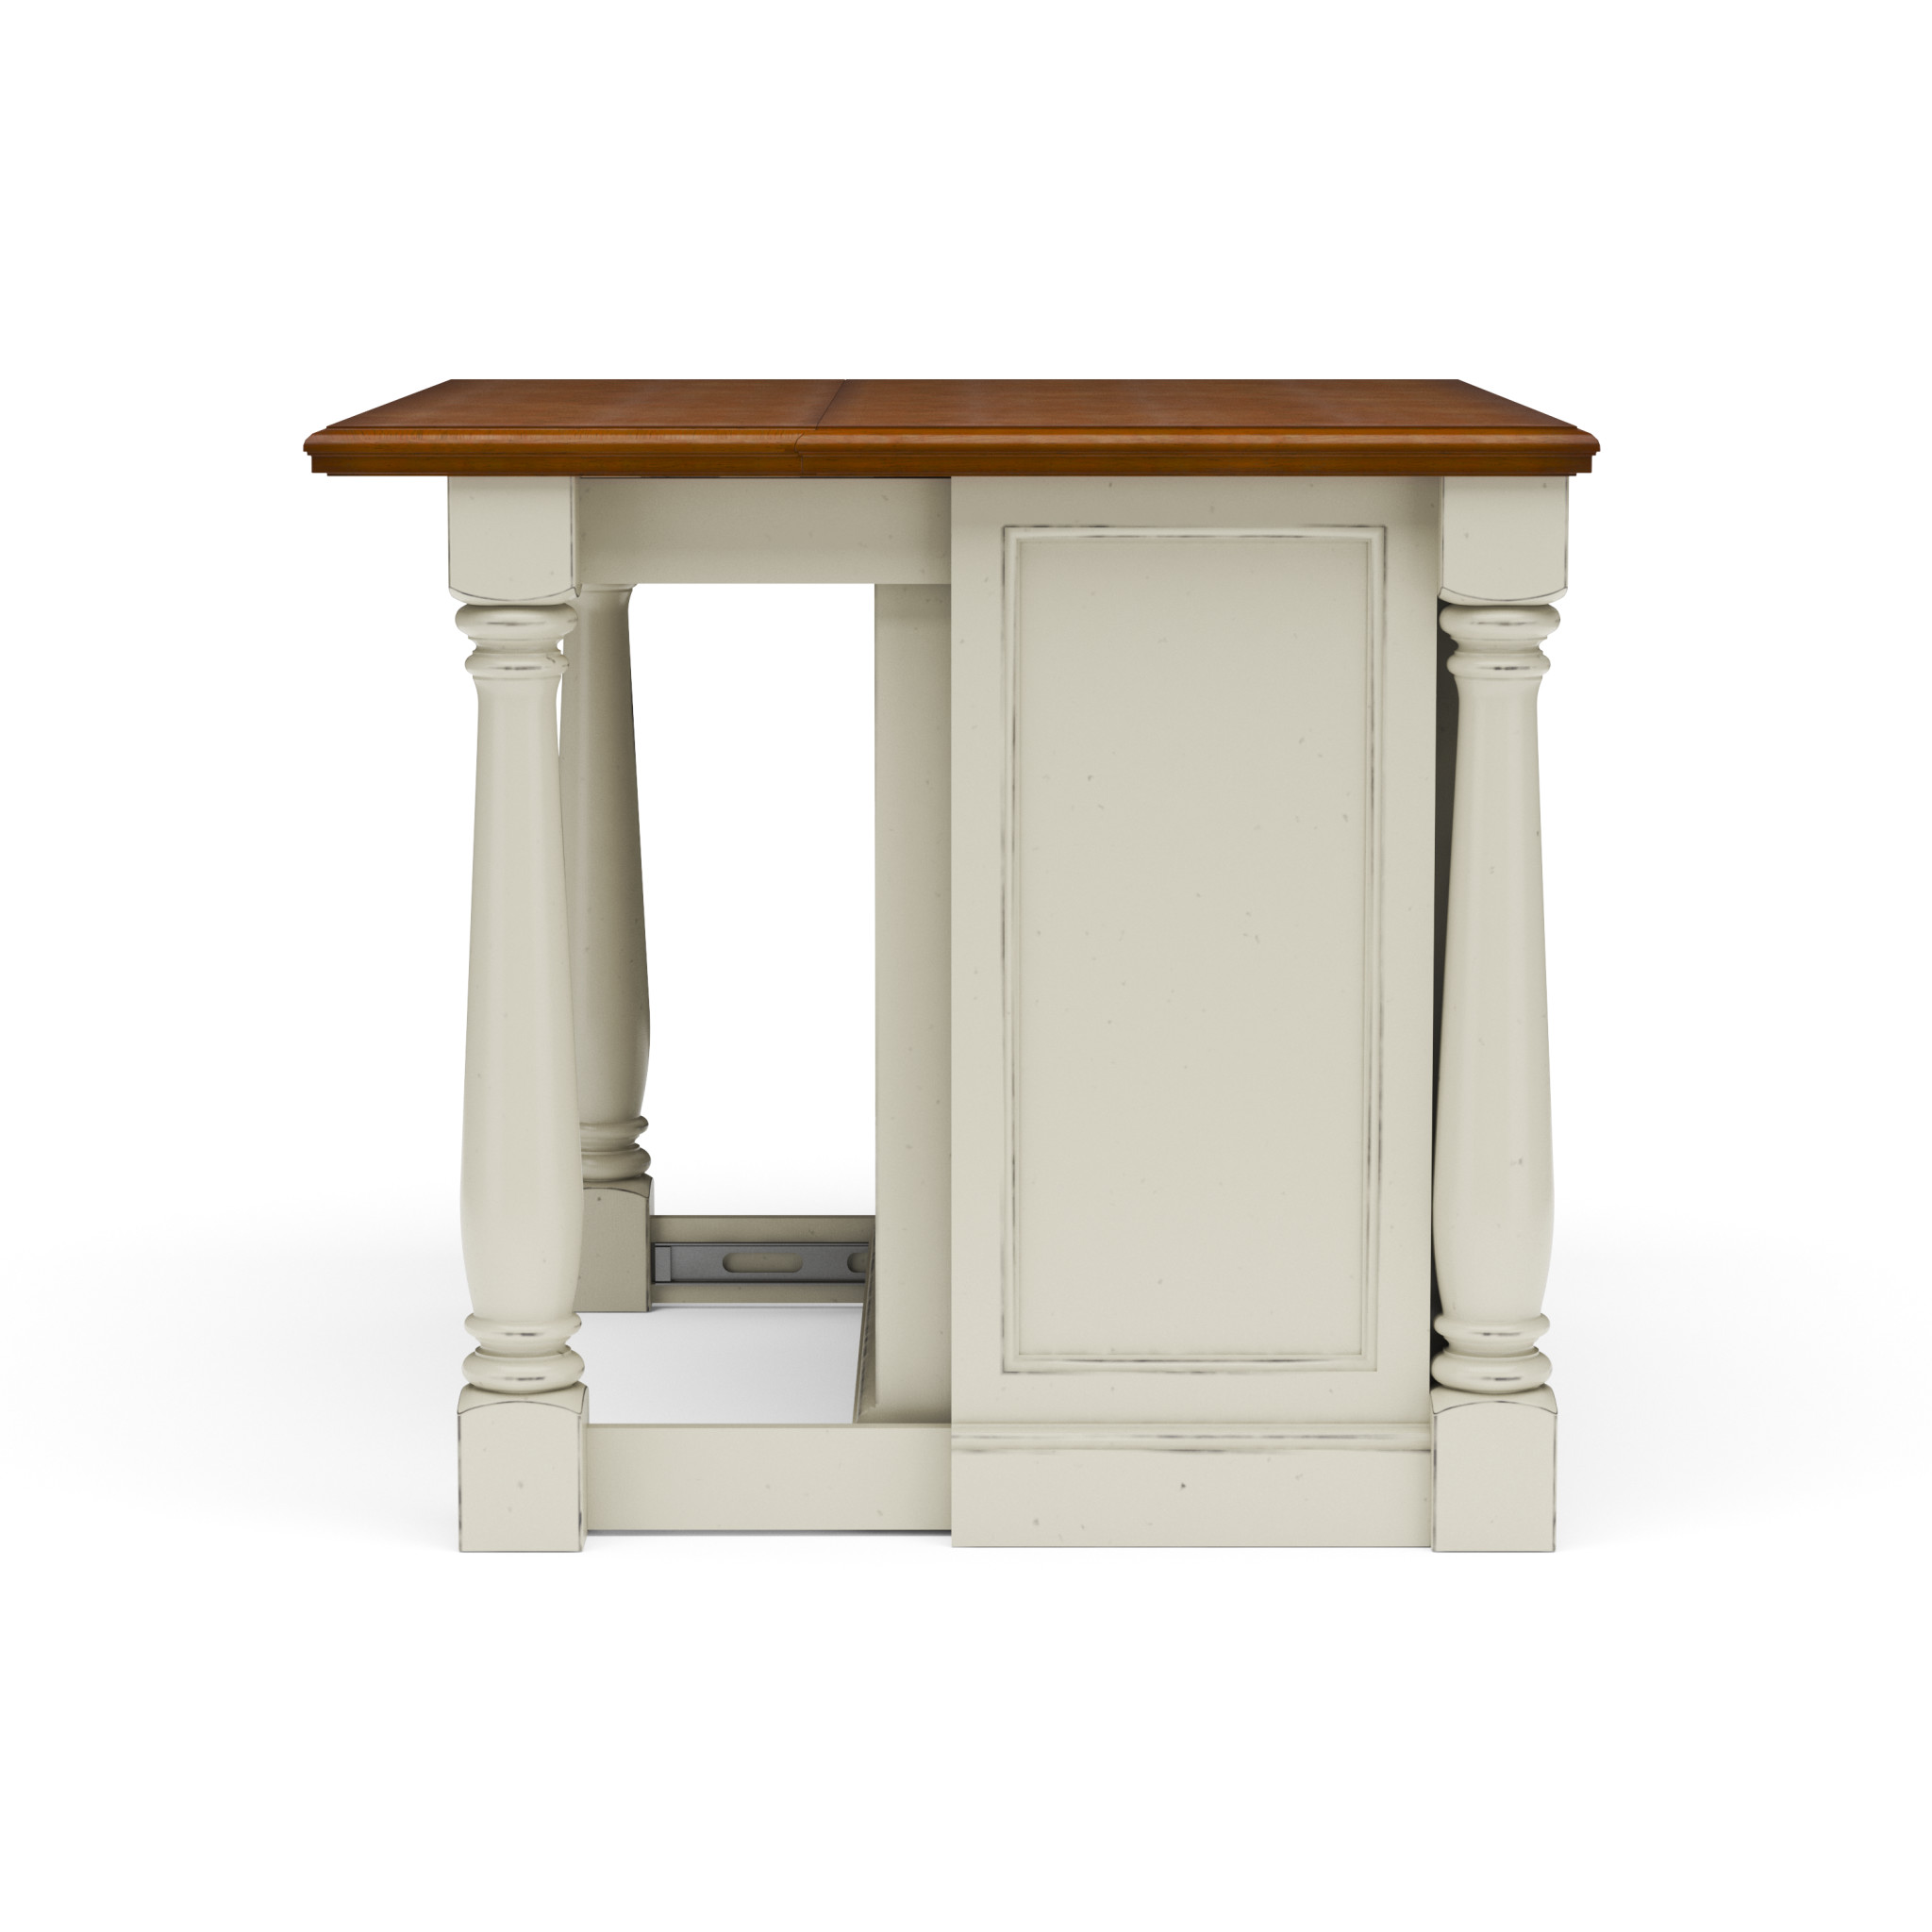 Homestyles Monarch Wood Kitchen Island in Off White - image 3 of 7